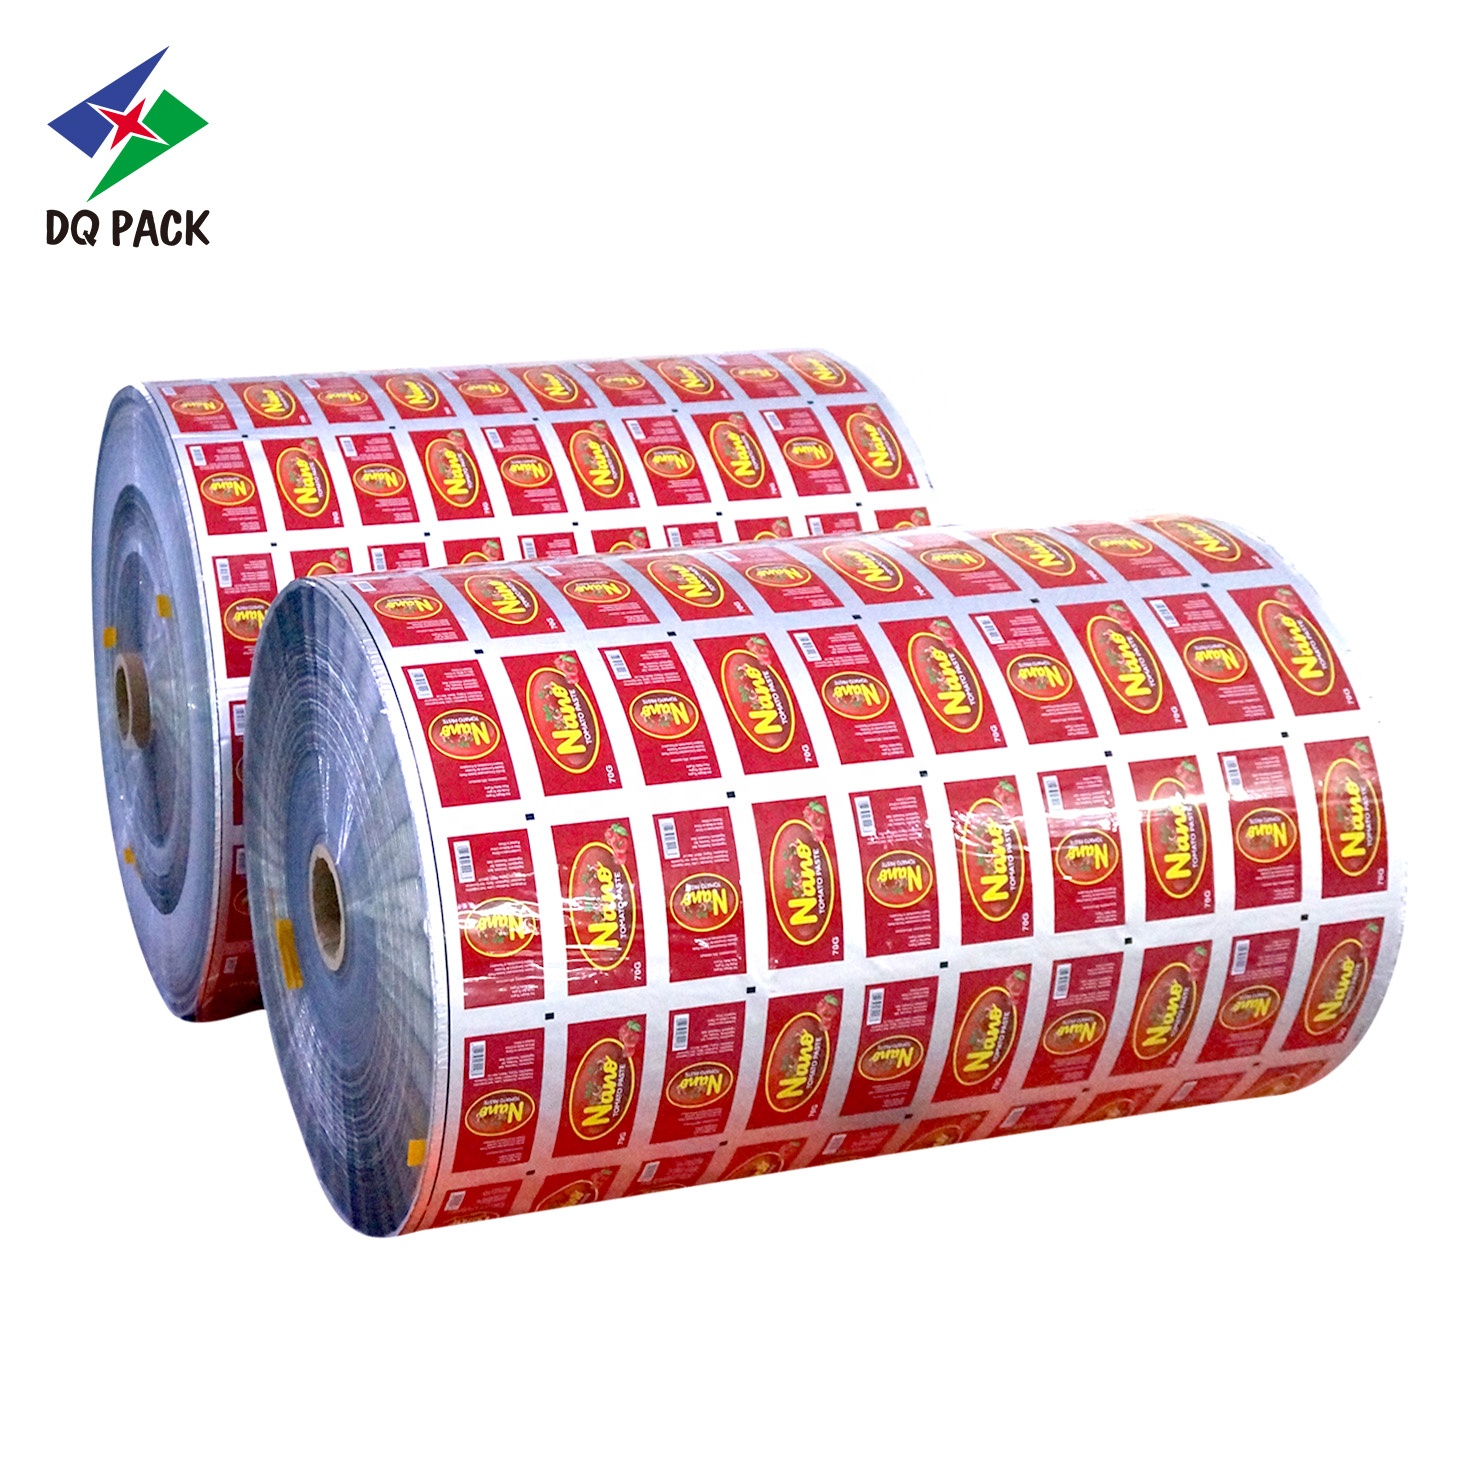 DQ PACK Wholesale AluminumFoil Film for tomato sauce ketchup packaging